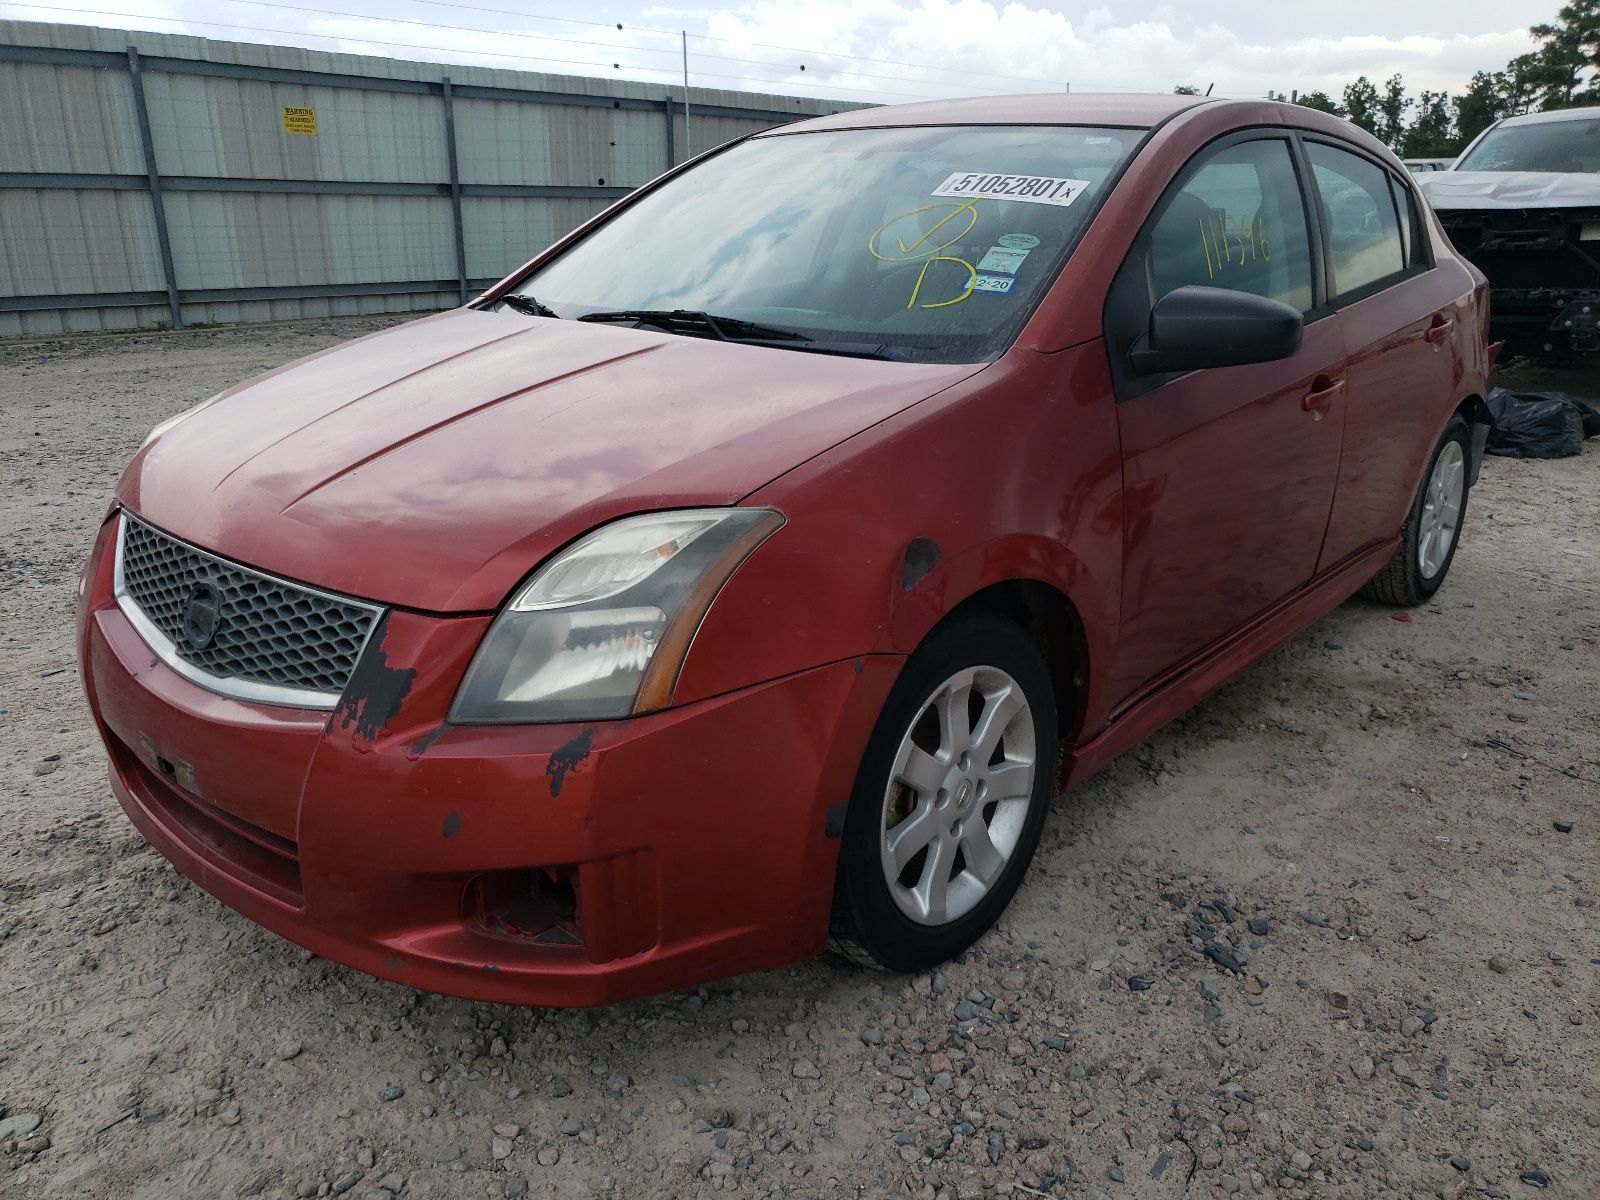 2 of 3N1AB6APXAL720278 Nissan Sentra 2010